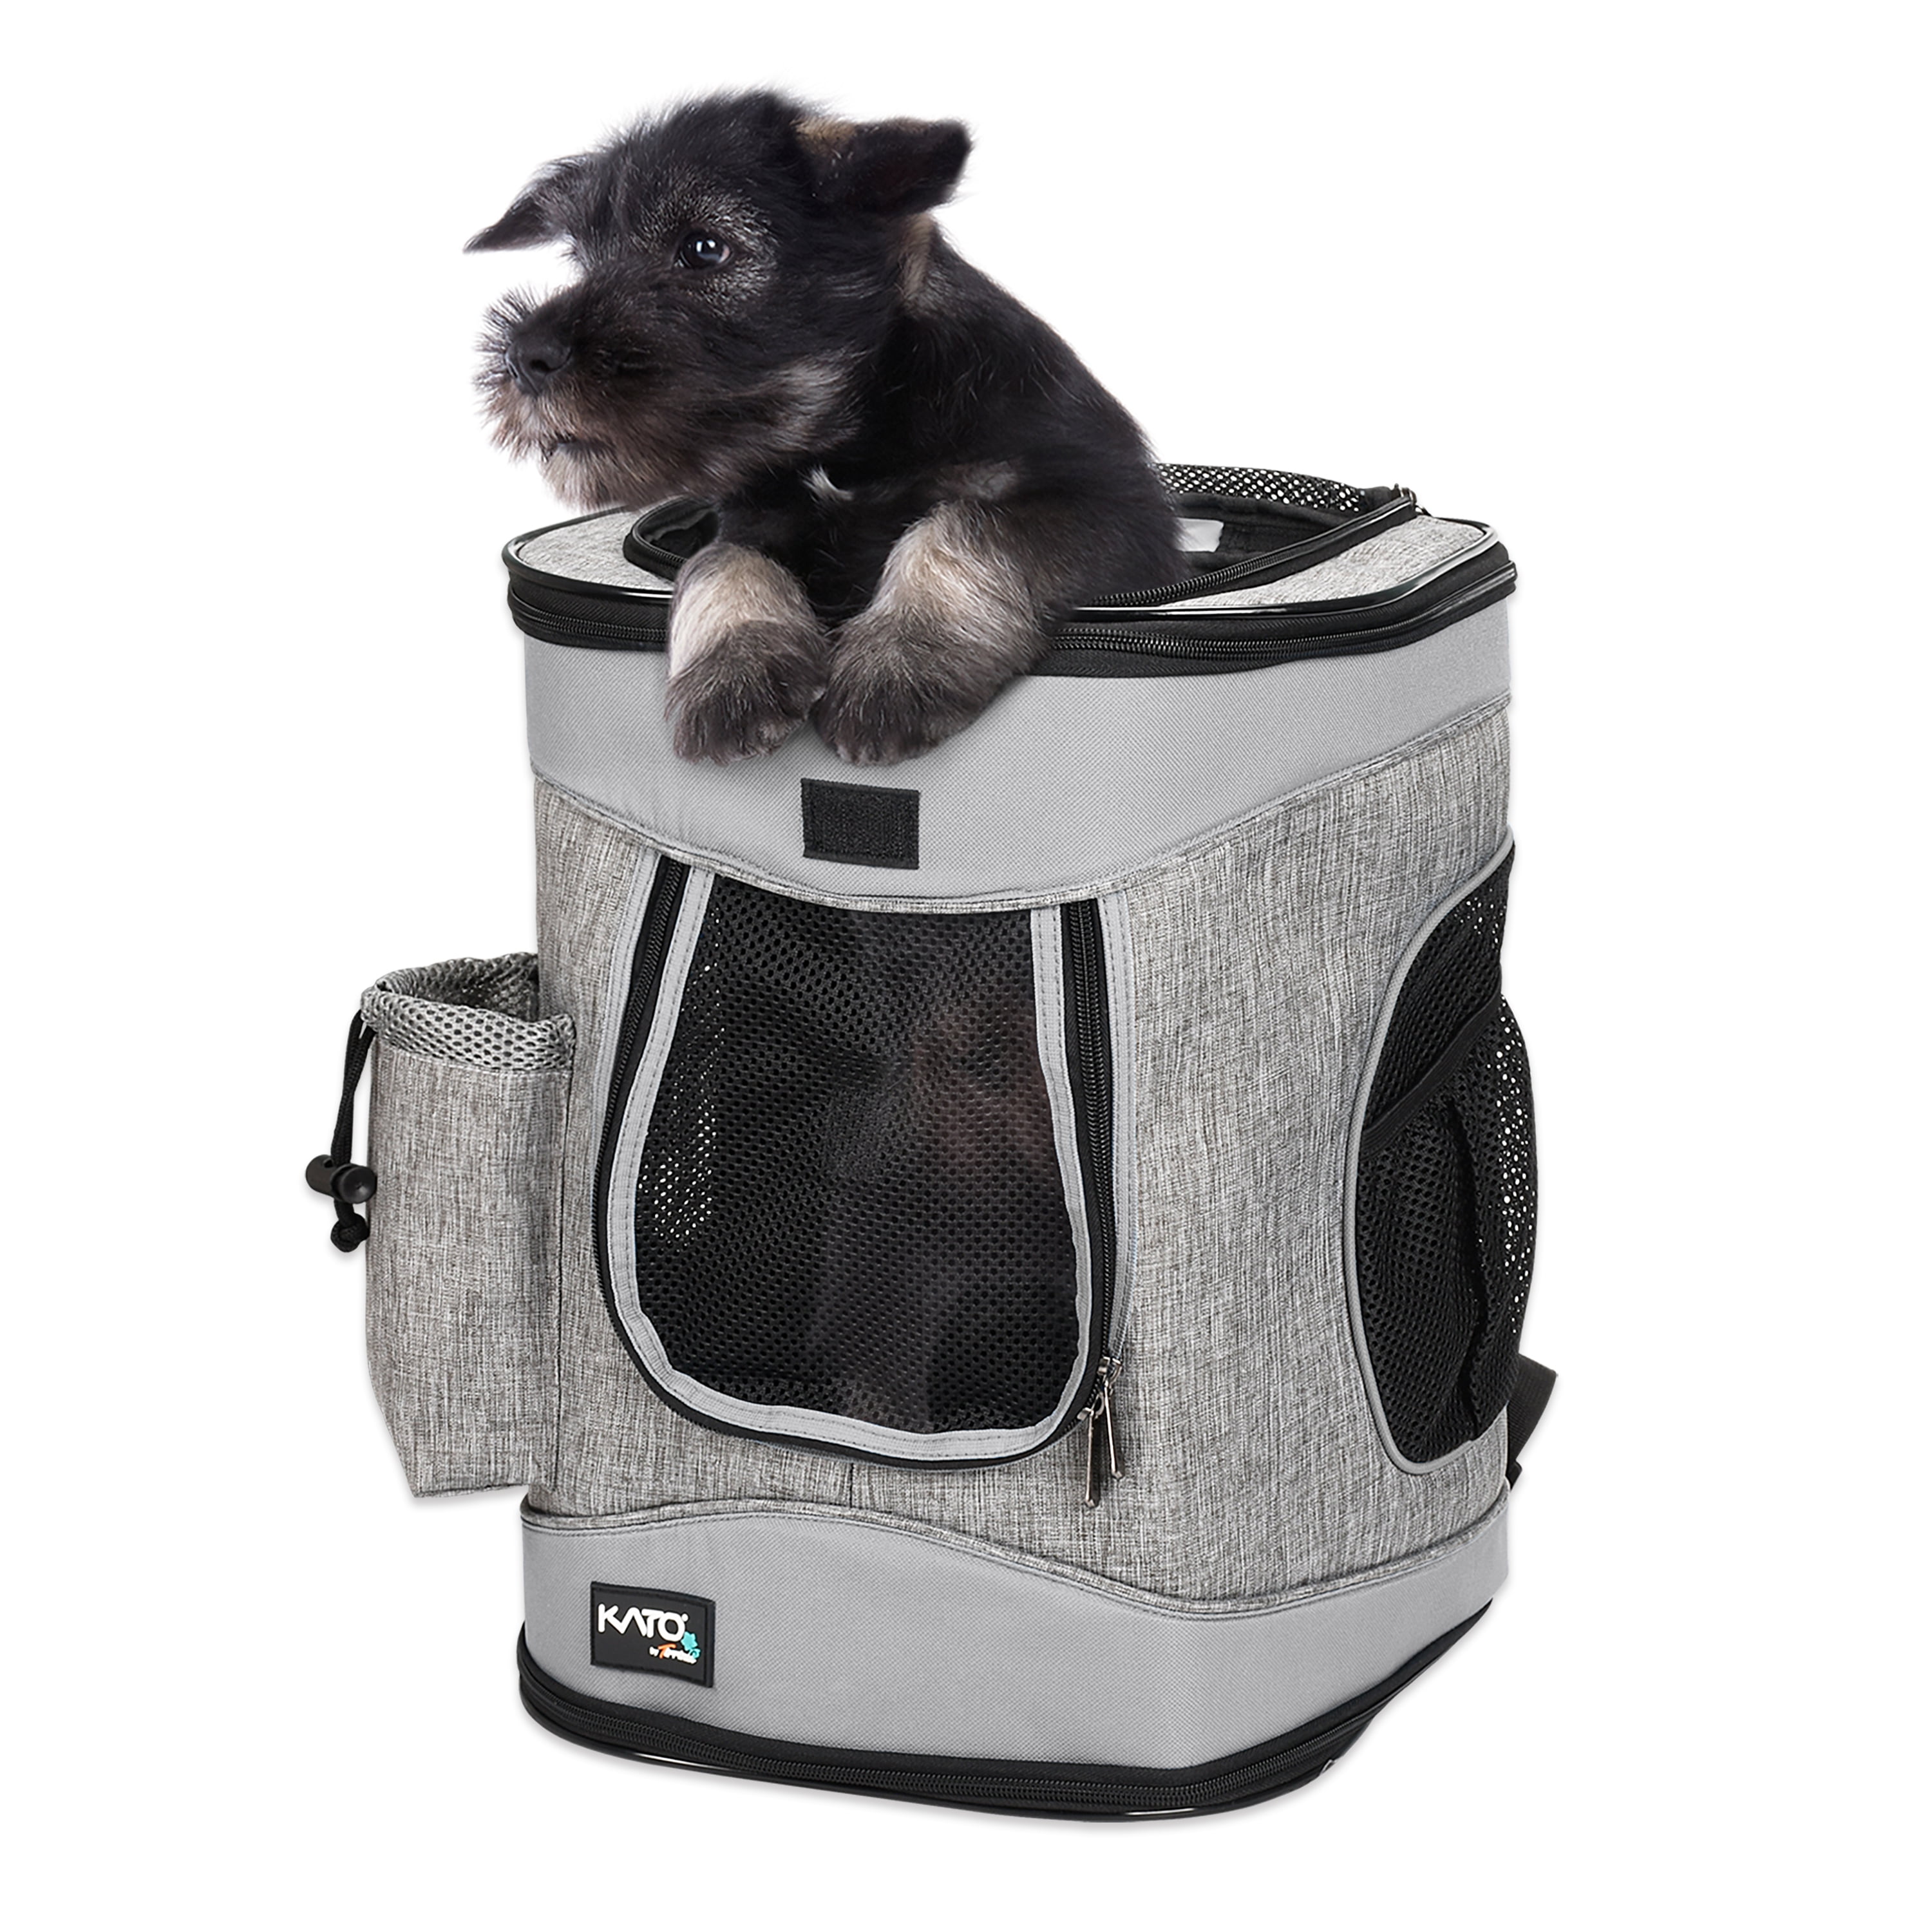 Smalls Pet Carrier with Pet Trek: Airline Approved! – A Pet with Paws